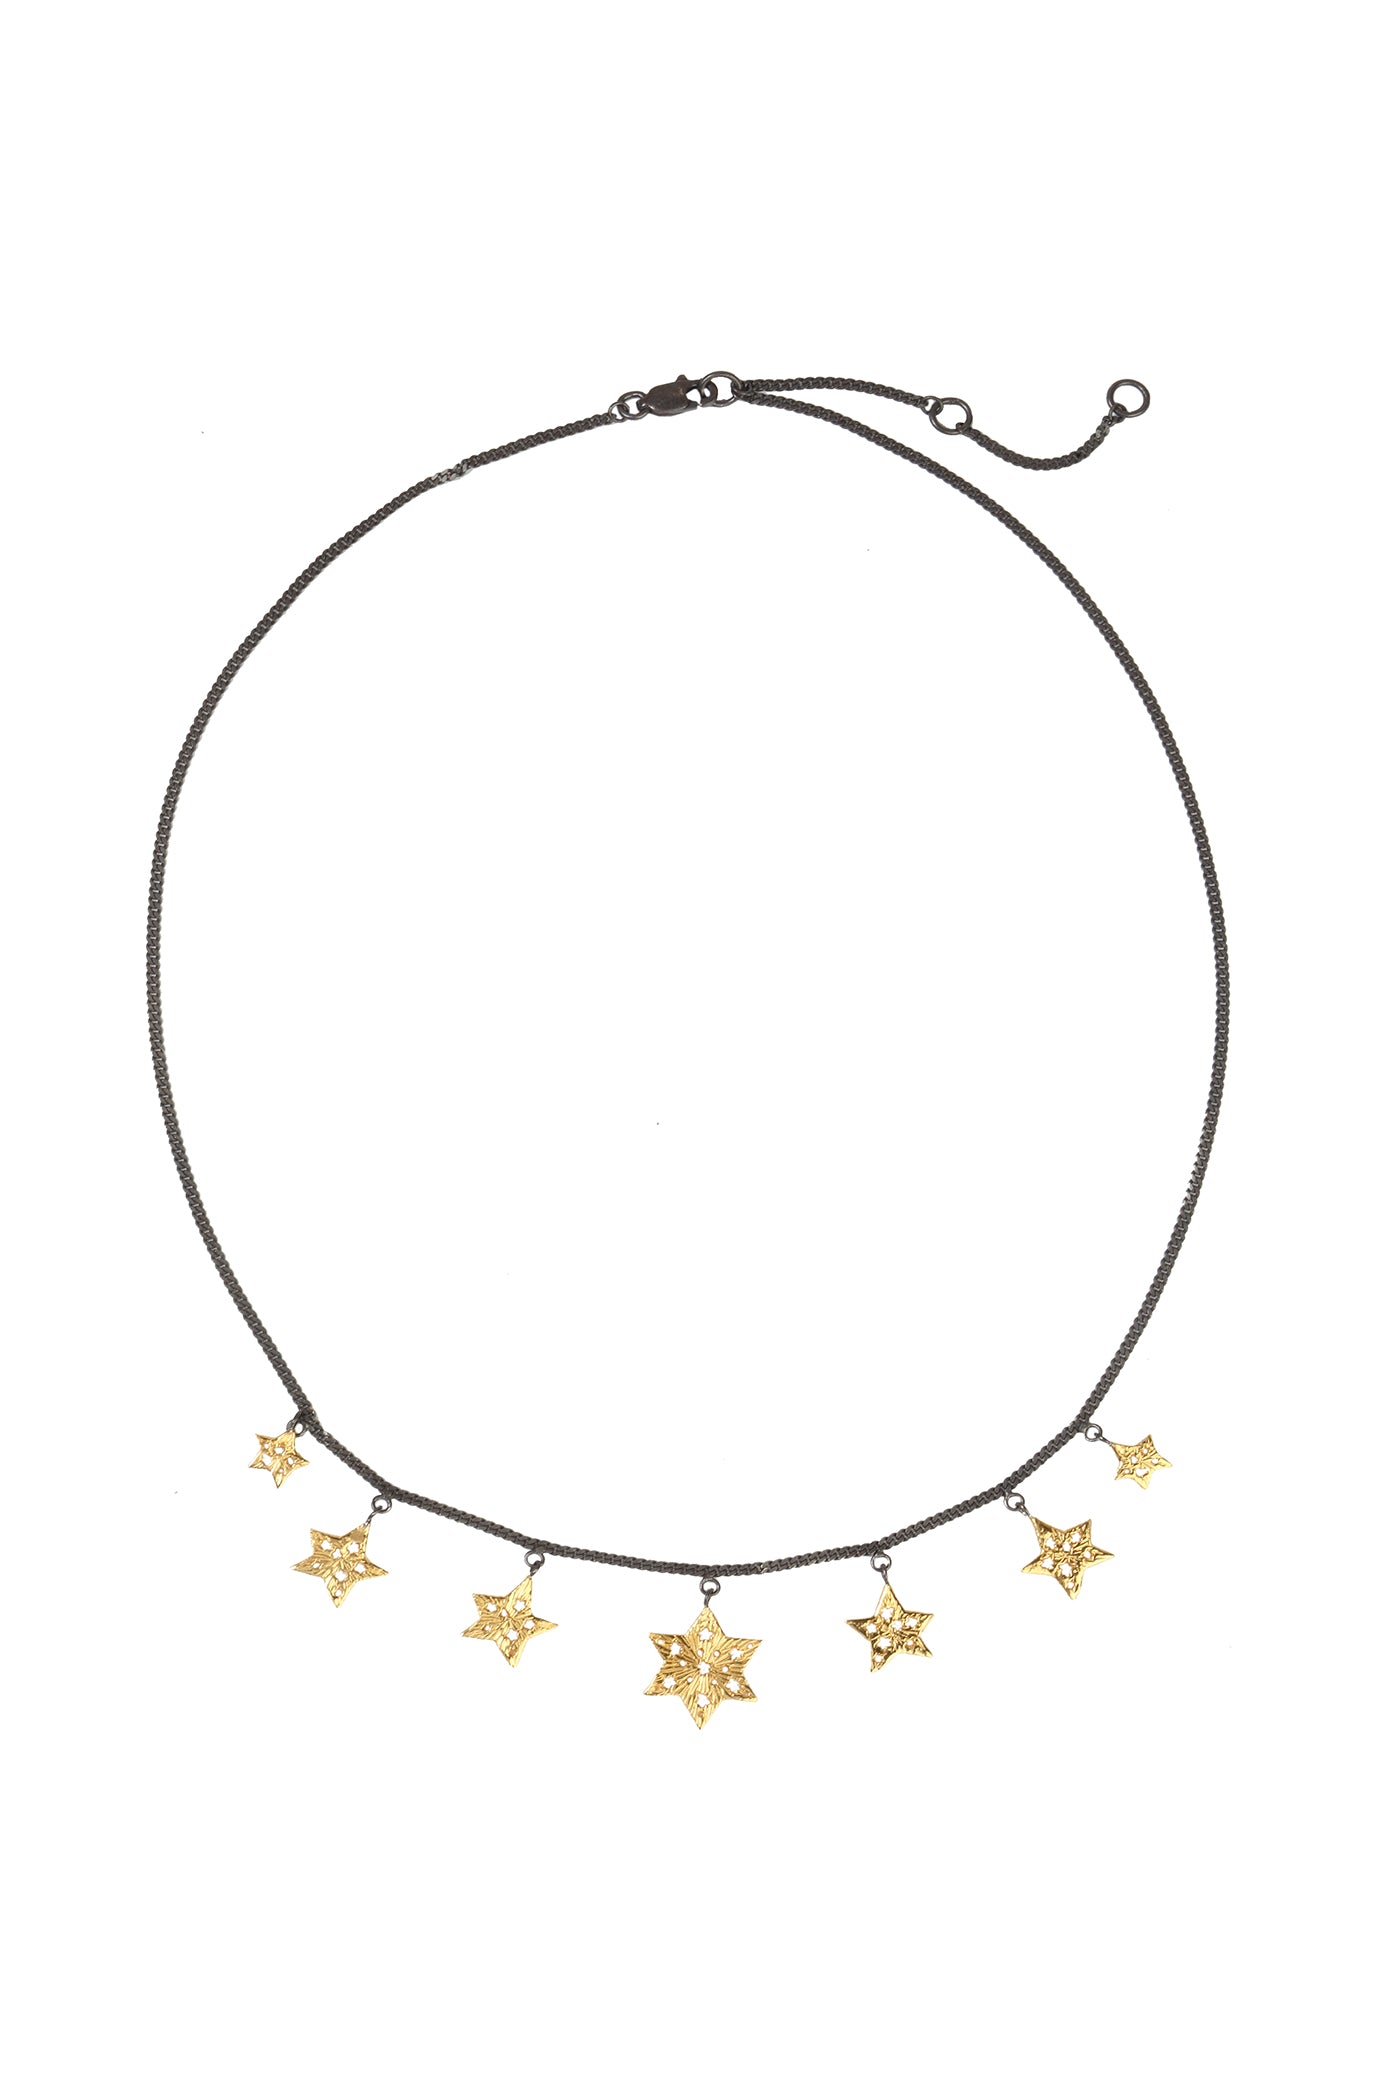 7 stars necklace. Silver, gold-plated, oxidized